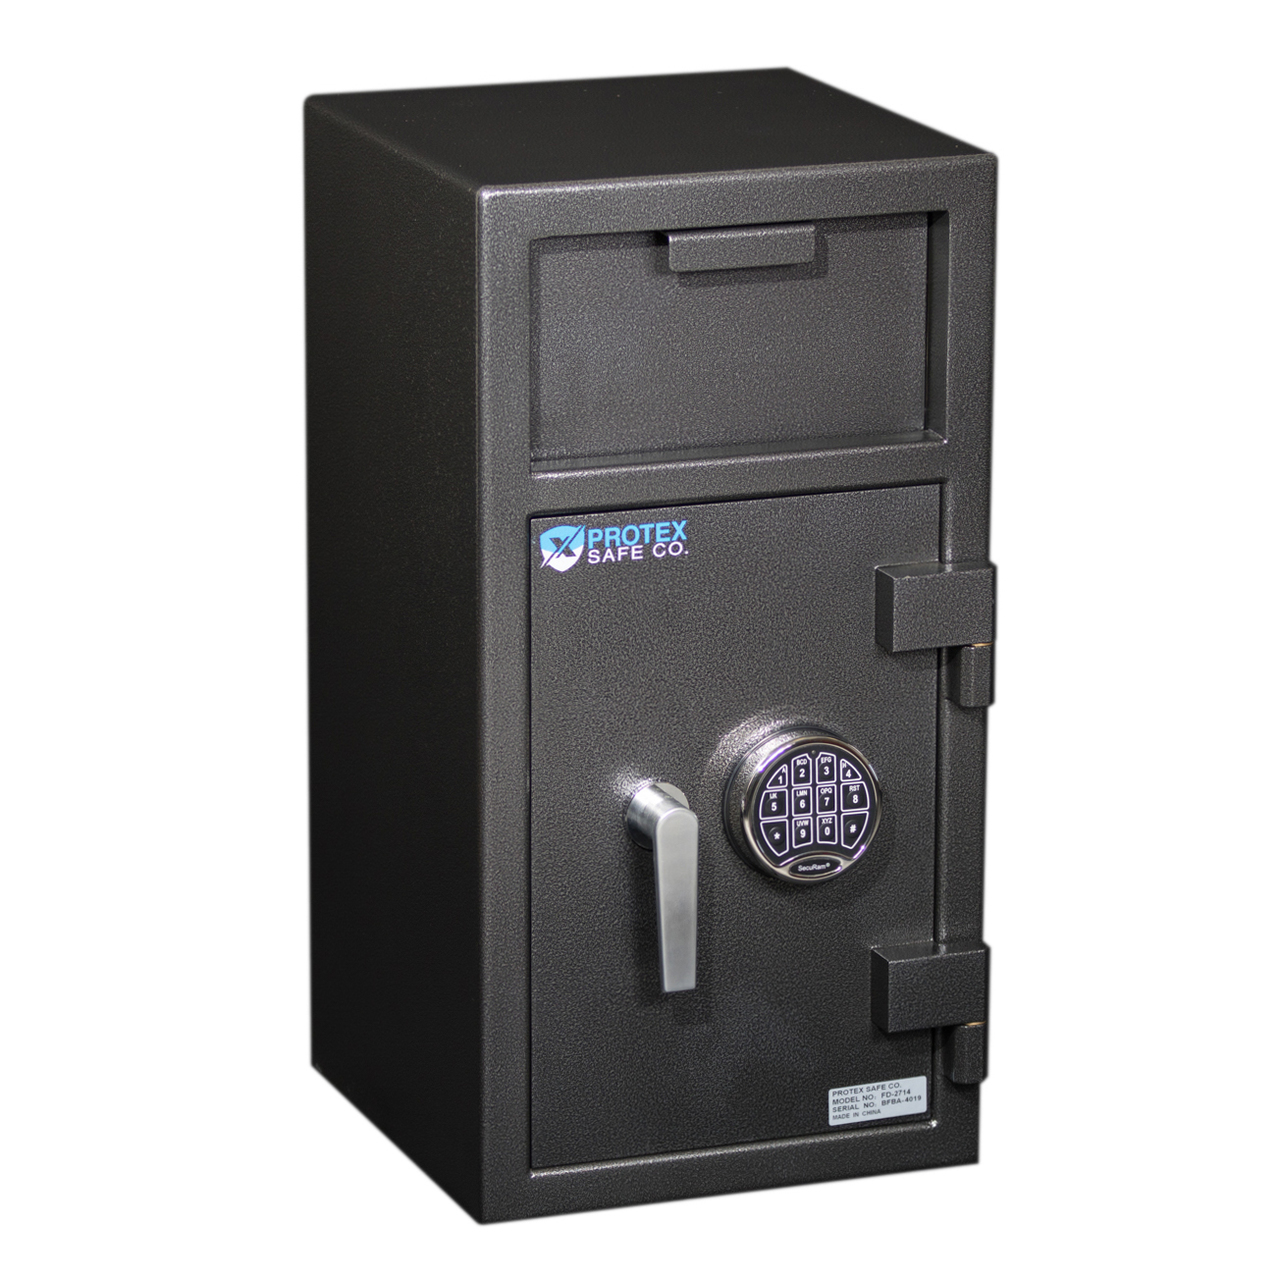 Protex Large Front Loading Depository Safe Fd-2714